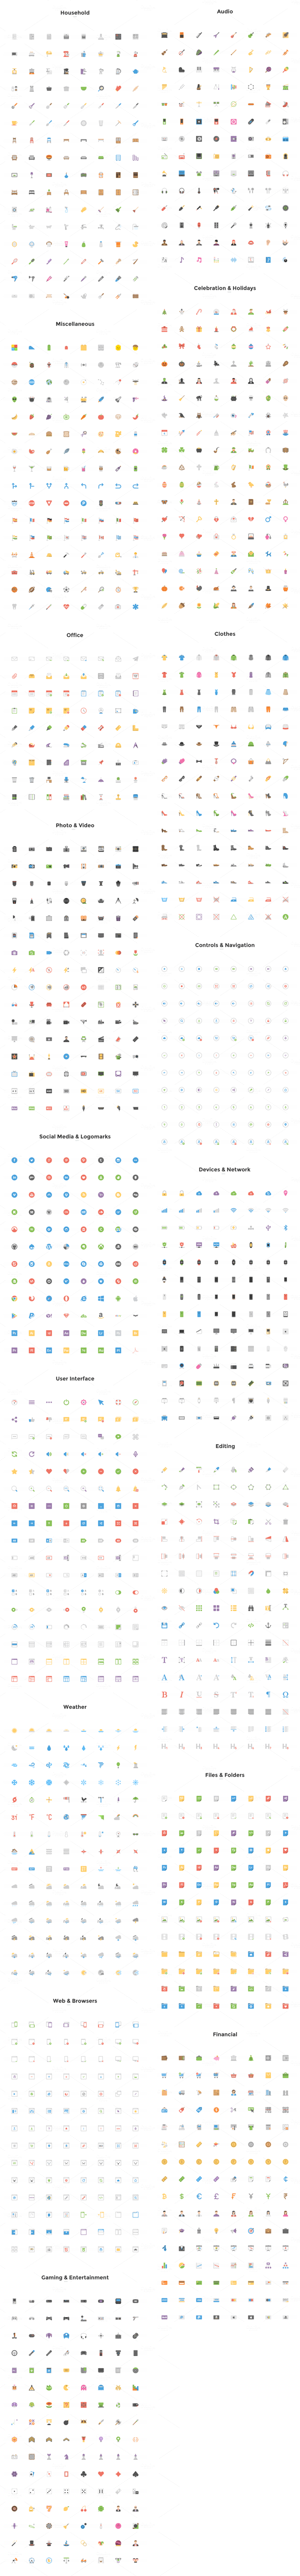 The Squid.ink Flat Icon Pack - 2000 flat icons divided into different categories.